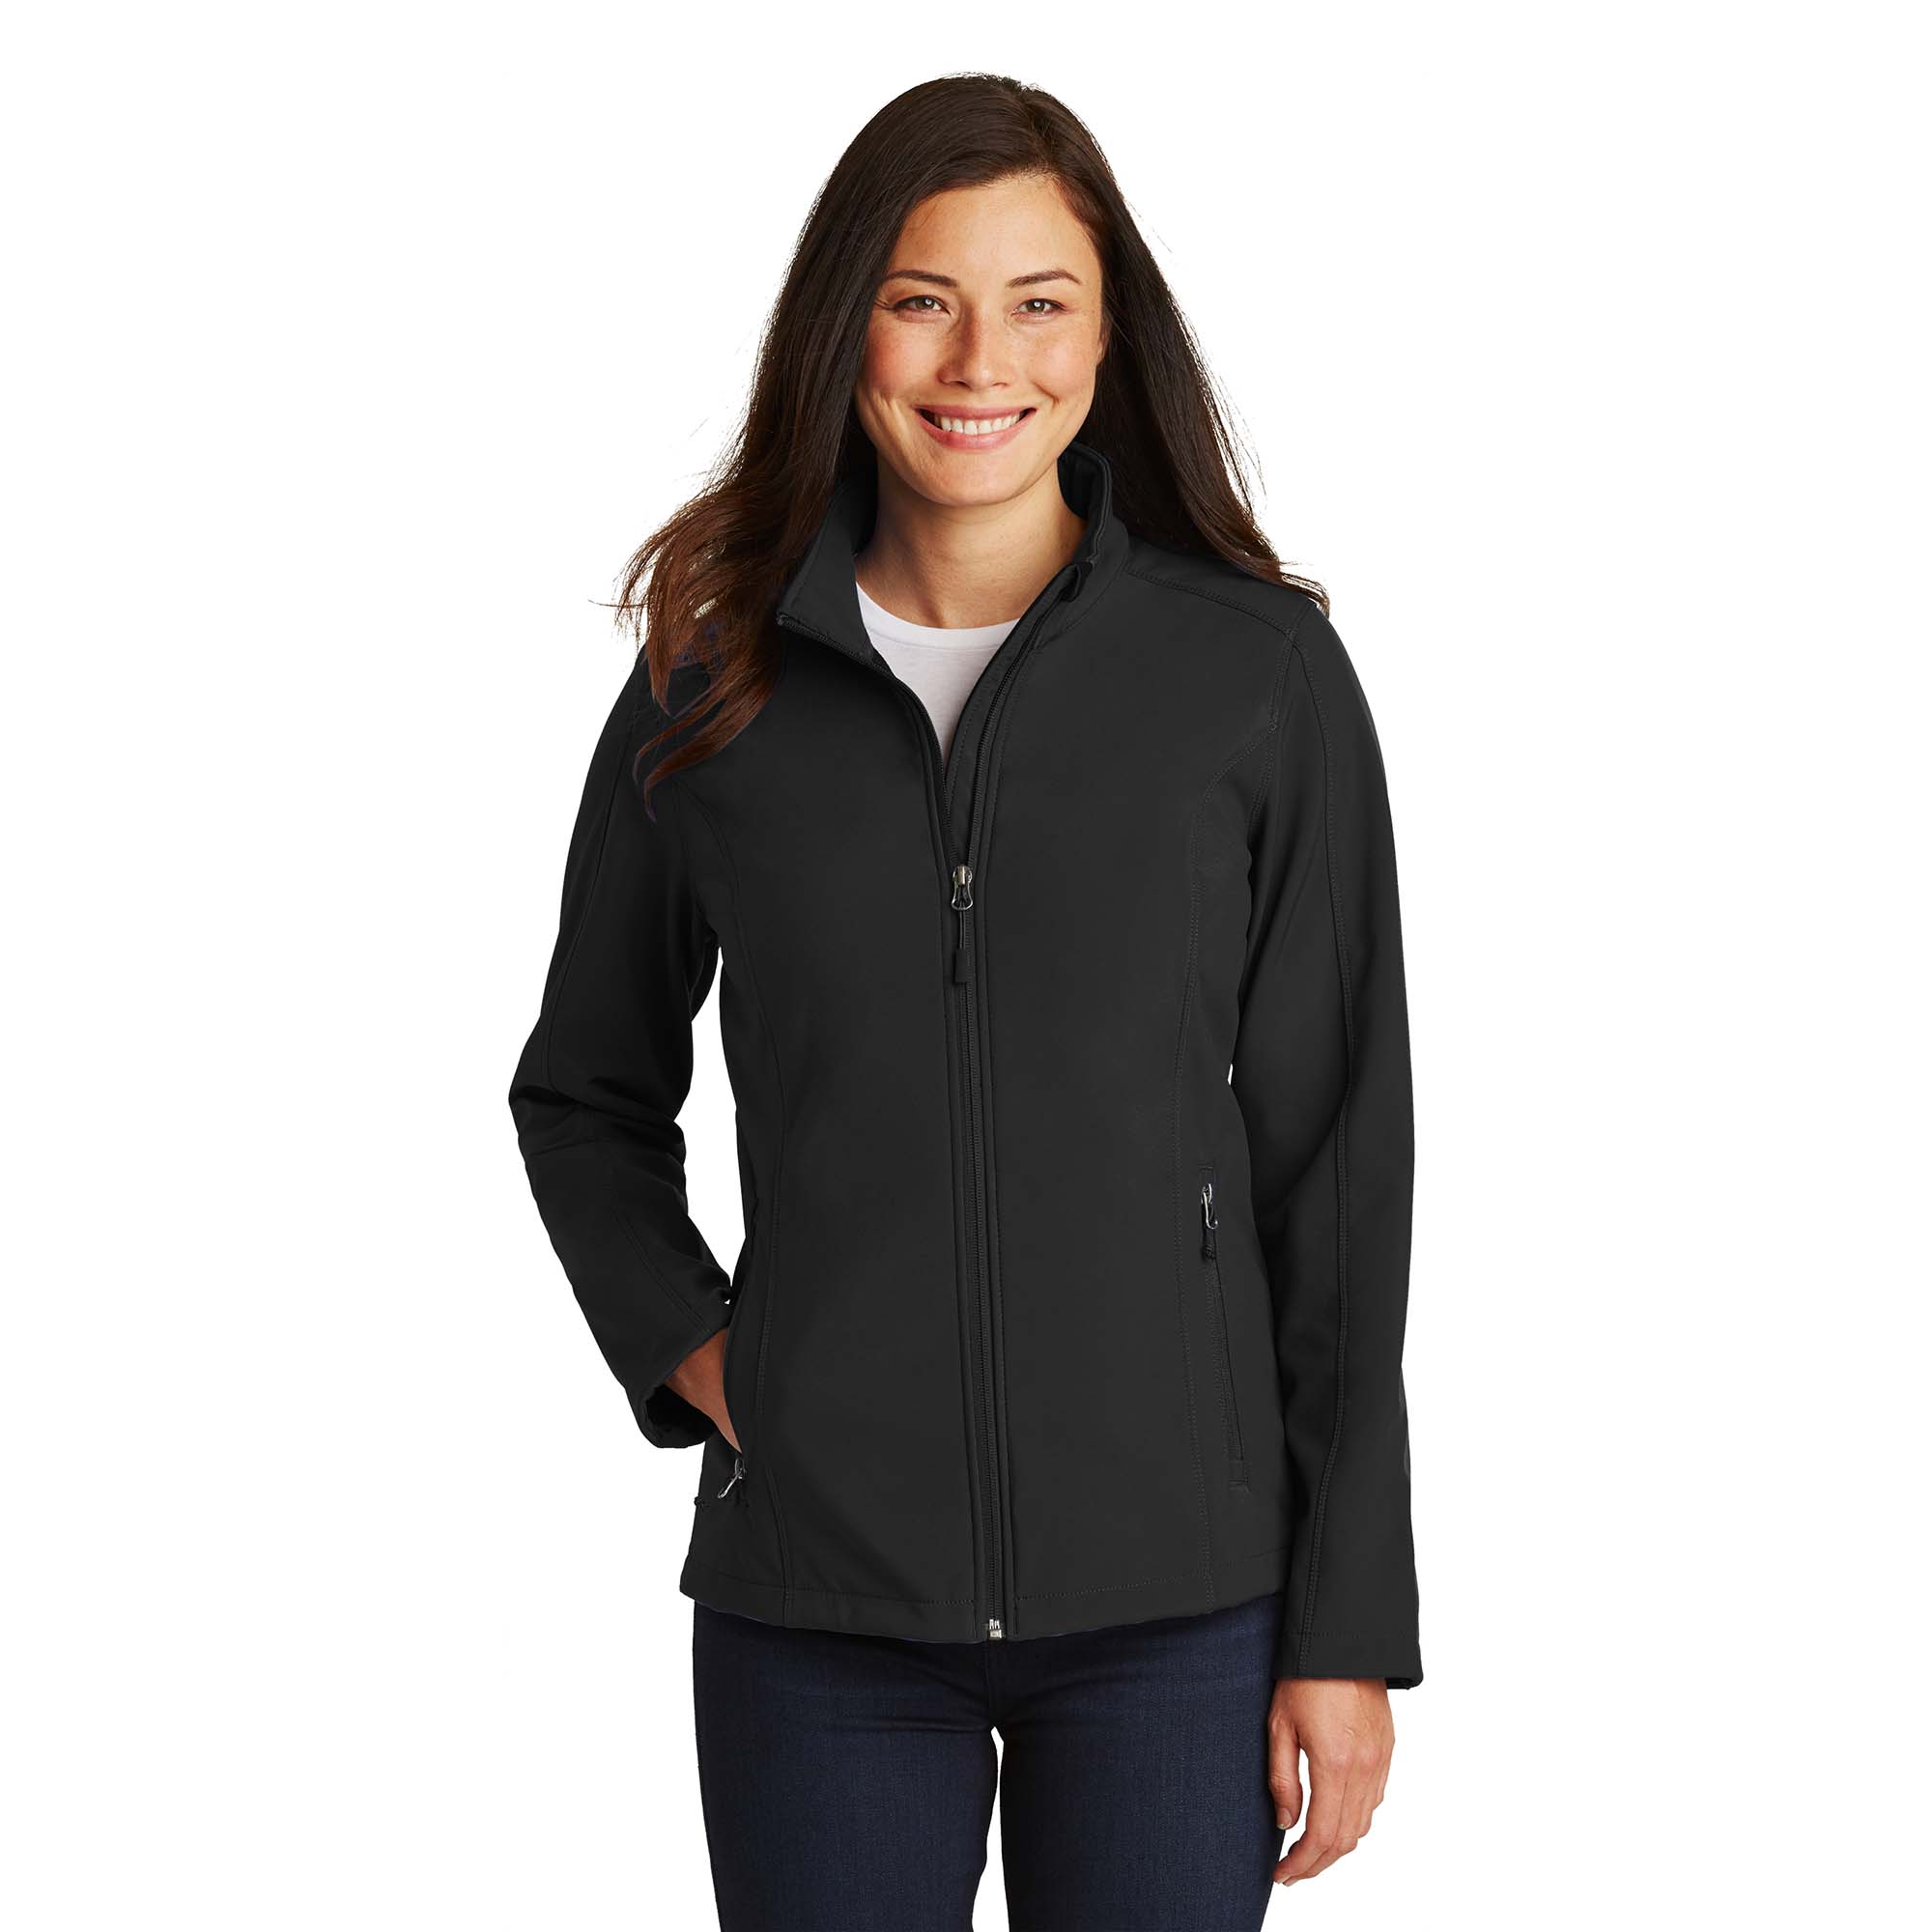 New Port Authority Ladies Textured Soft Shell Jacket in your choice of color